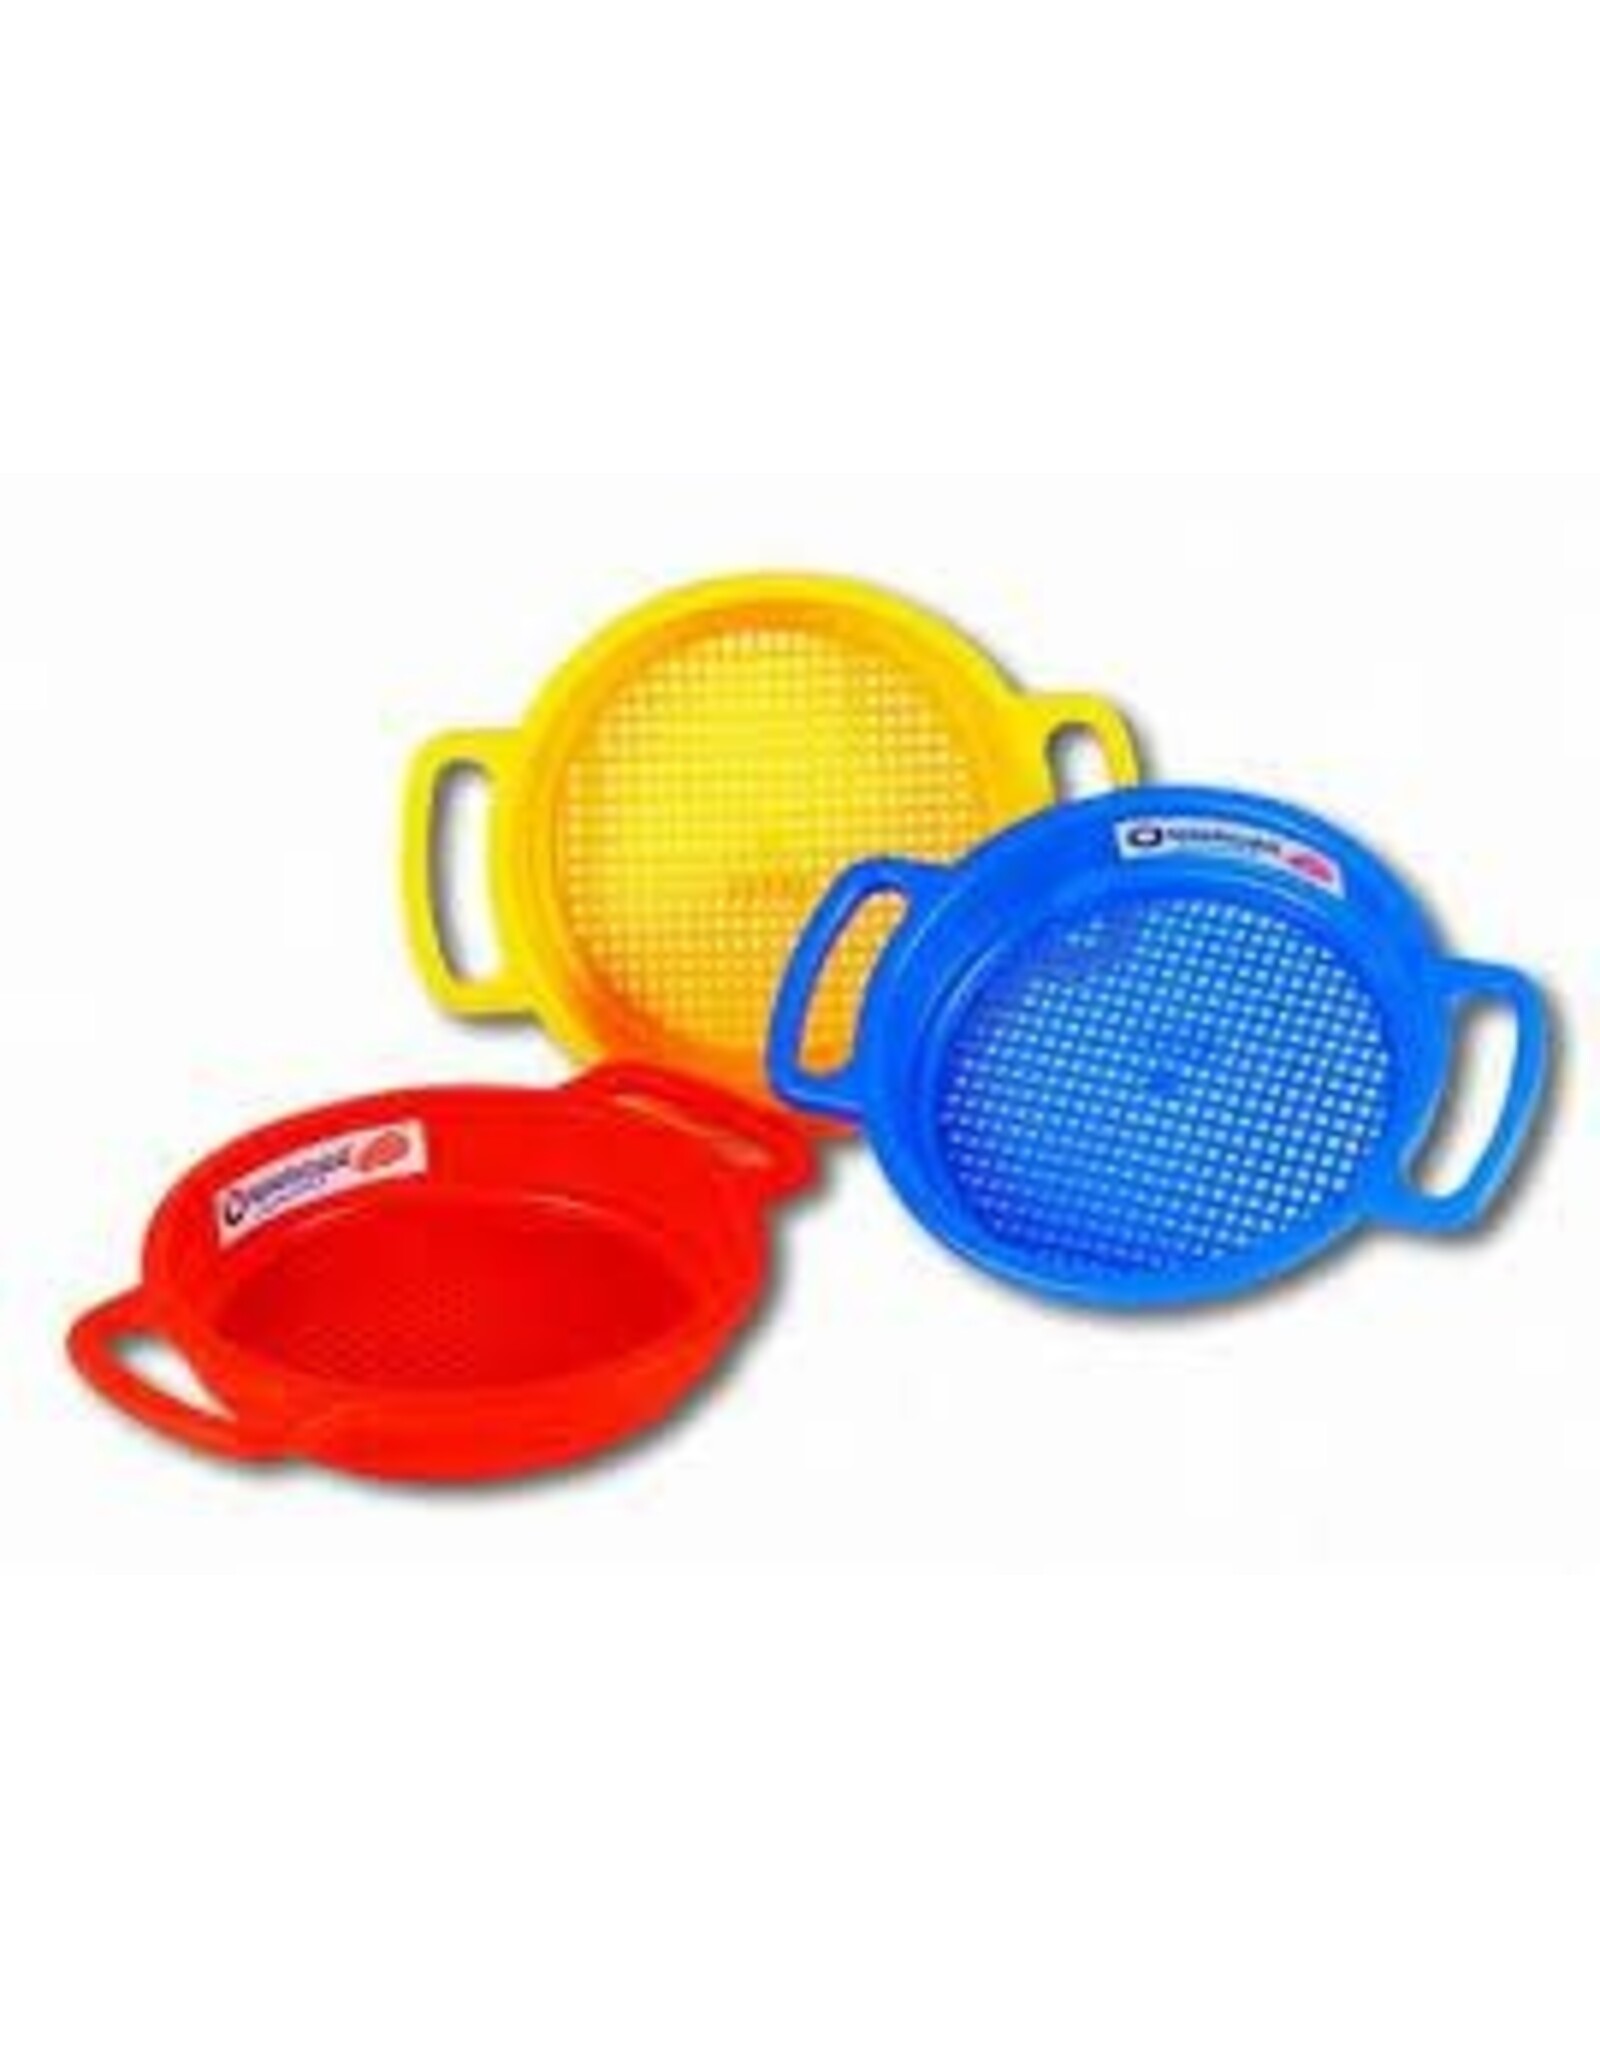 Large Sand Sieve Red